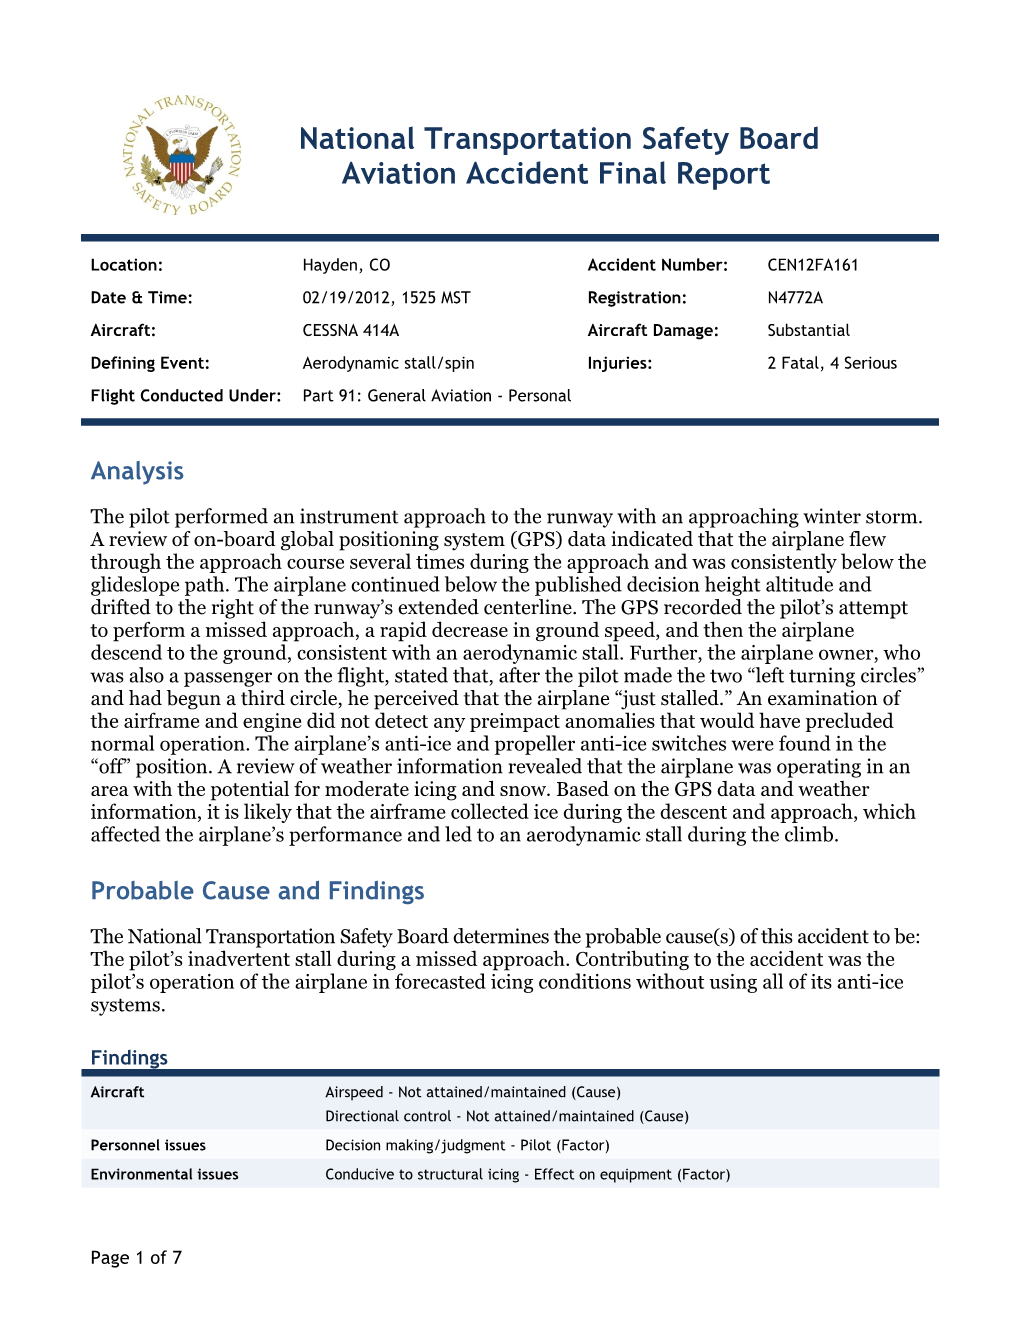 National Transportation Safety Board Aviation Accident Final Report